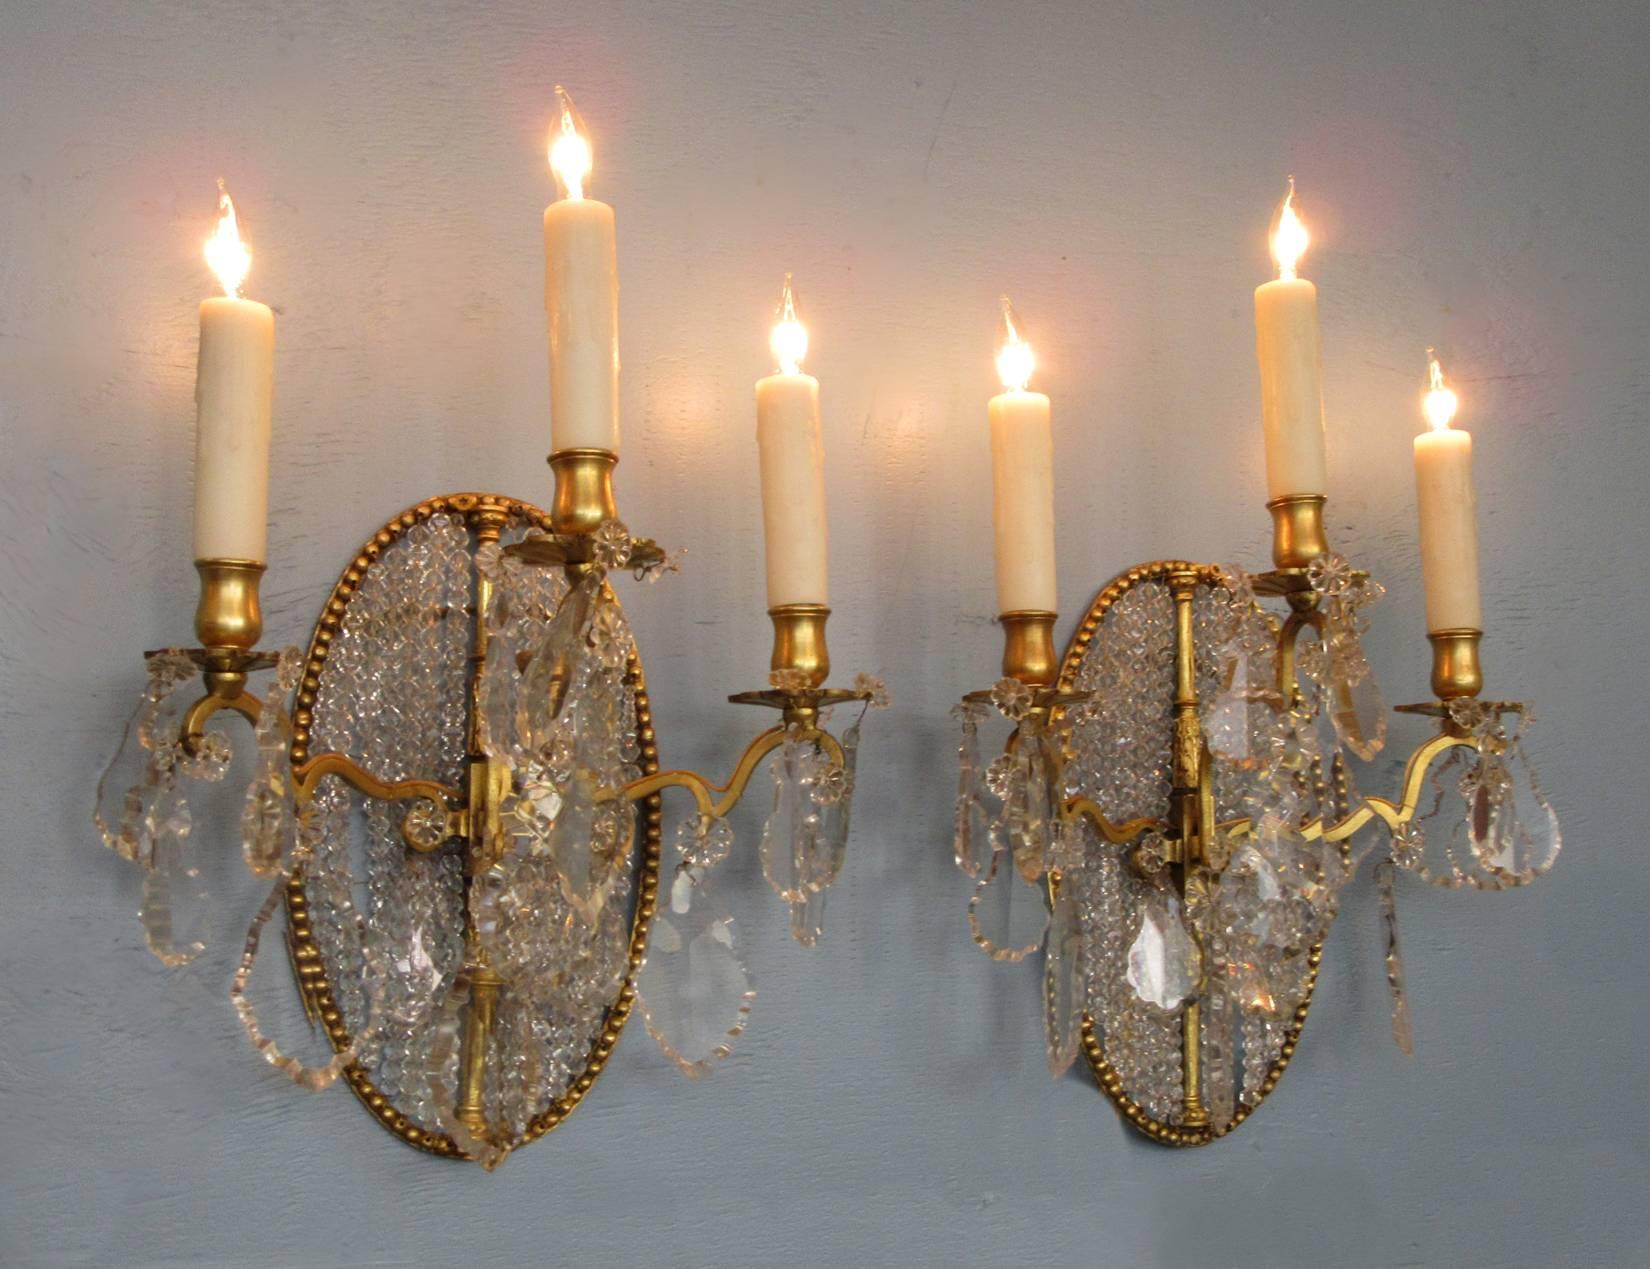 A pair of 19th century Italian neoclassical bronze doré and crystal sconces, circa 1830, each featuring three candle arms and beaded crystal medallion back. The pair have recently been cleaned and rewired with porcelain sockets.
 